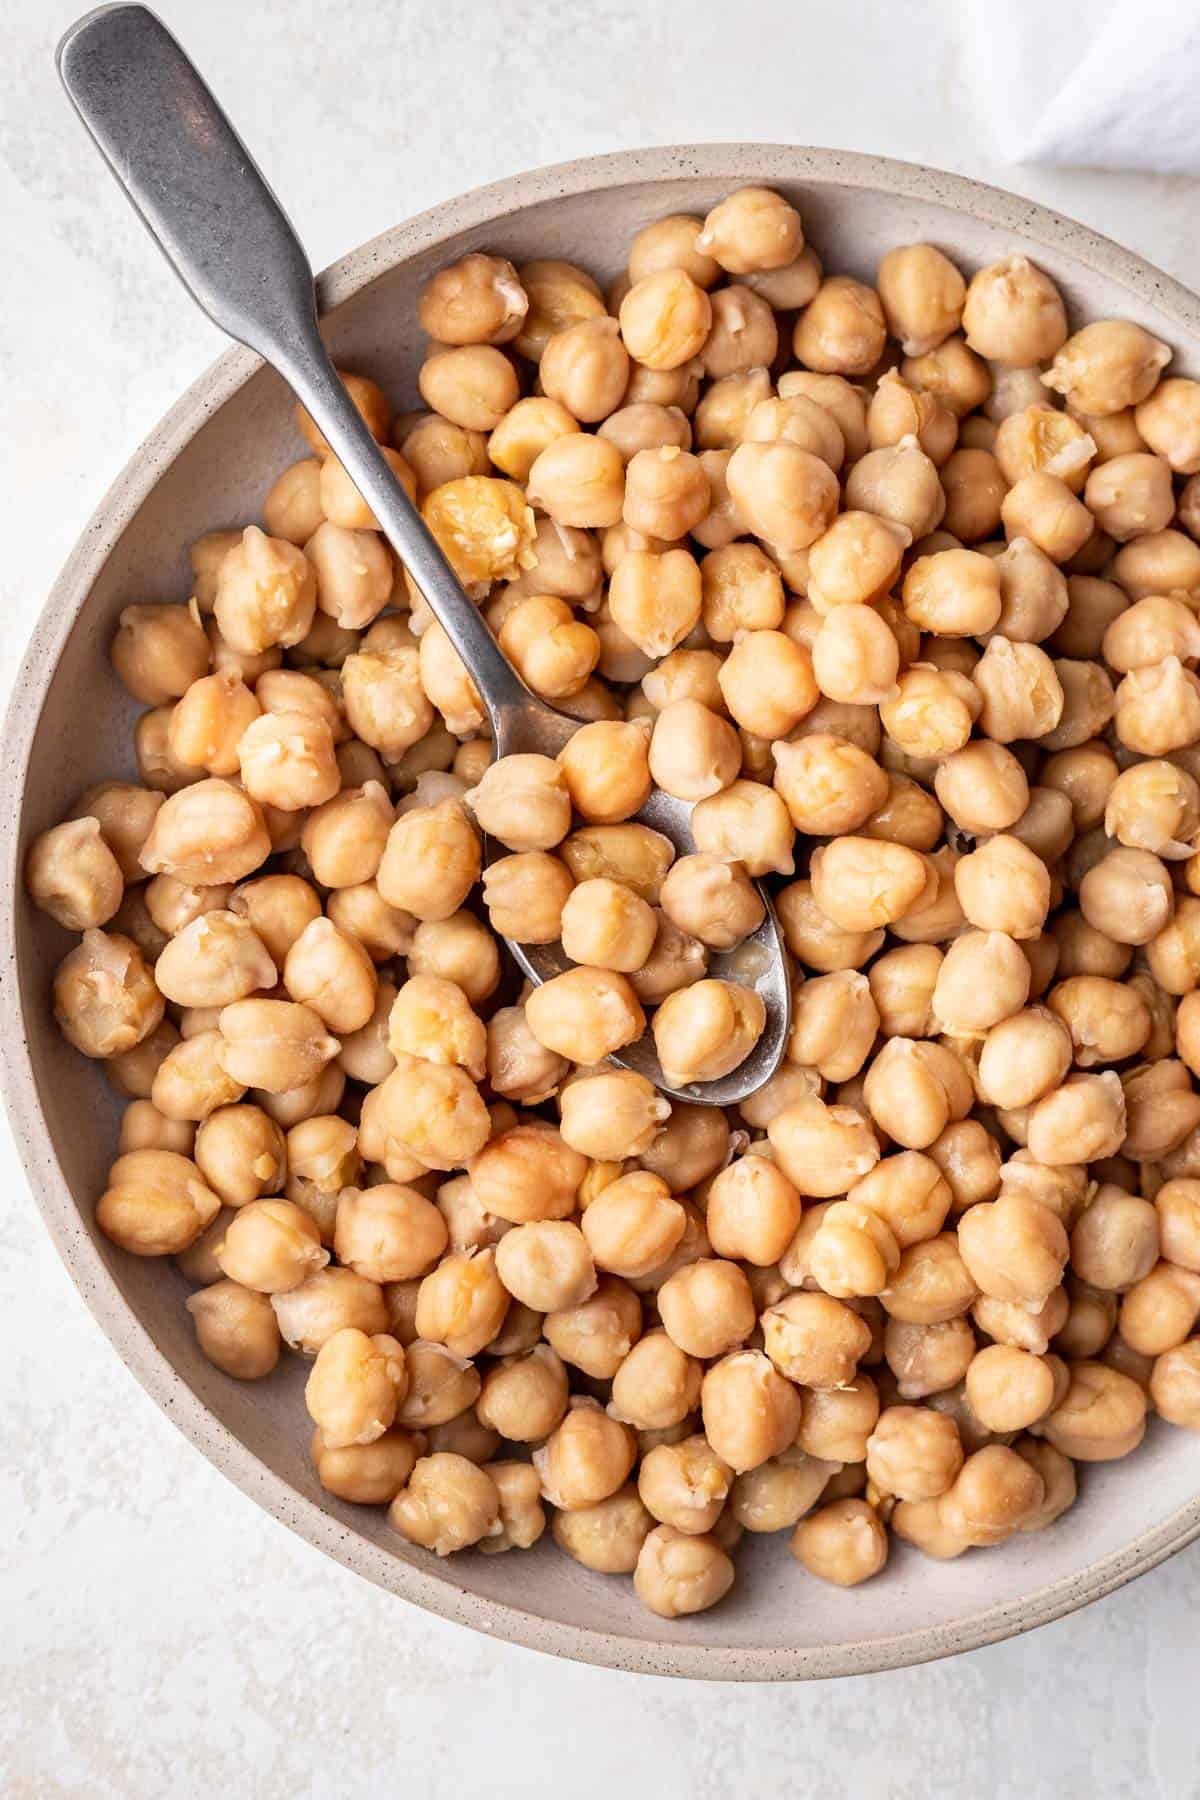 Bowl of cooked chickpeas with spoon.